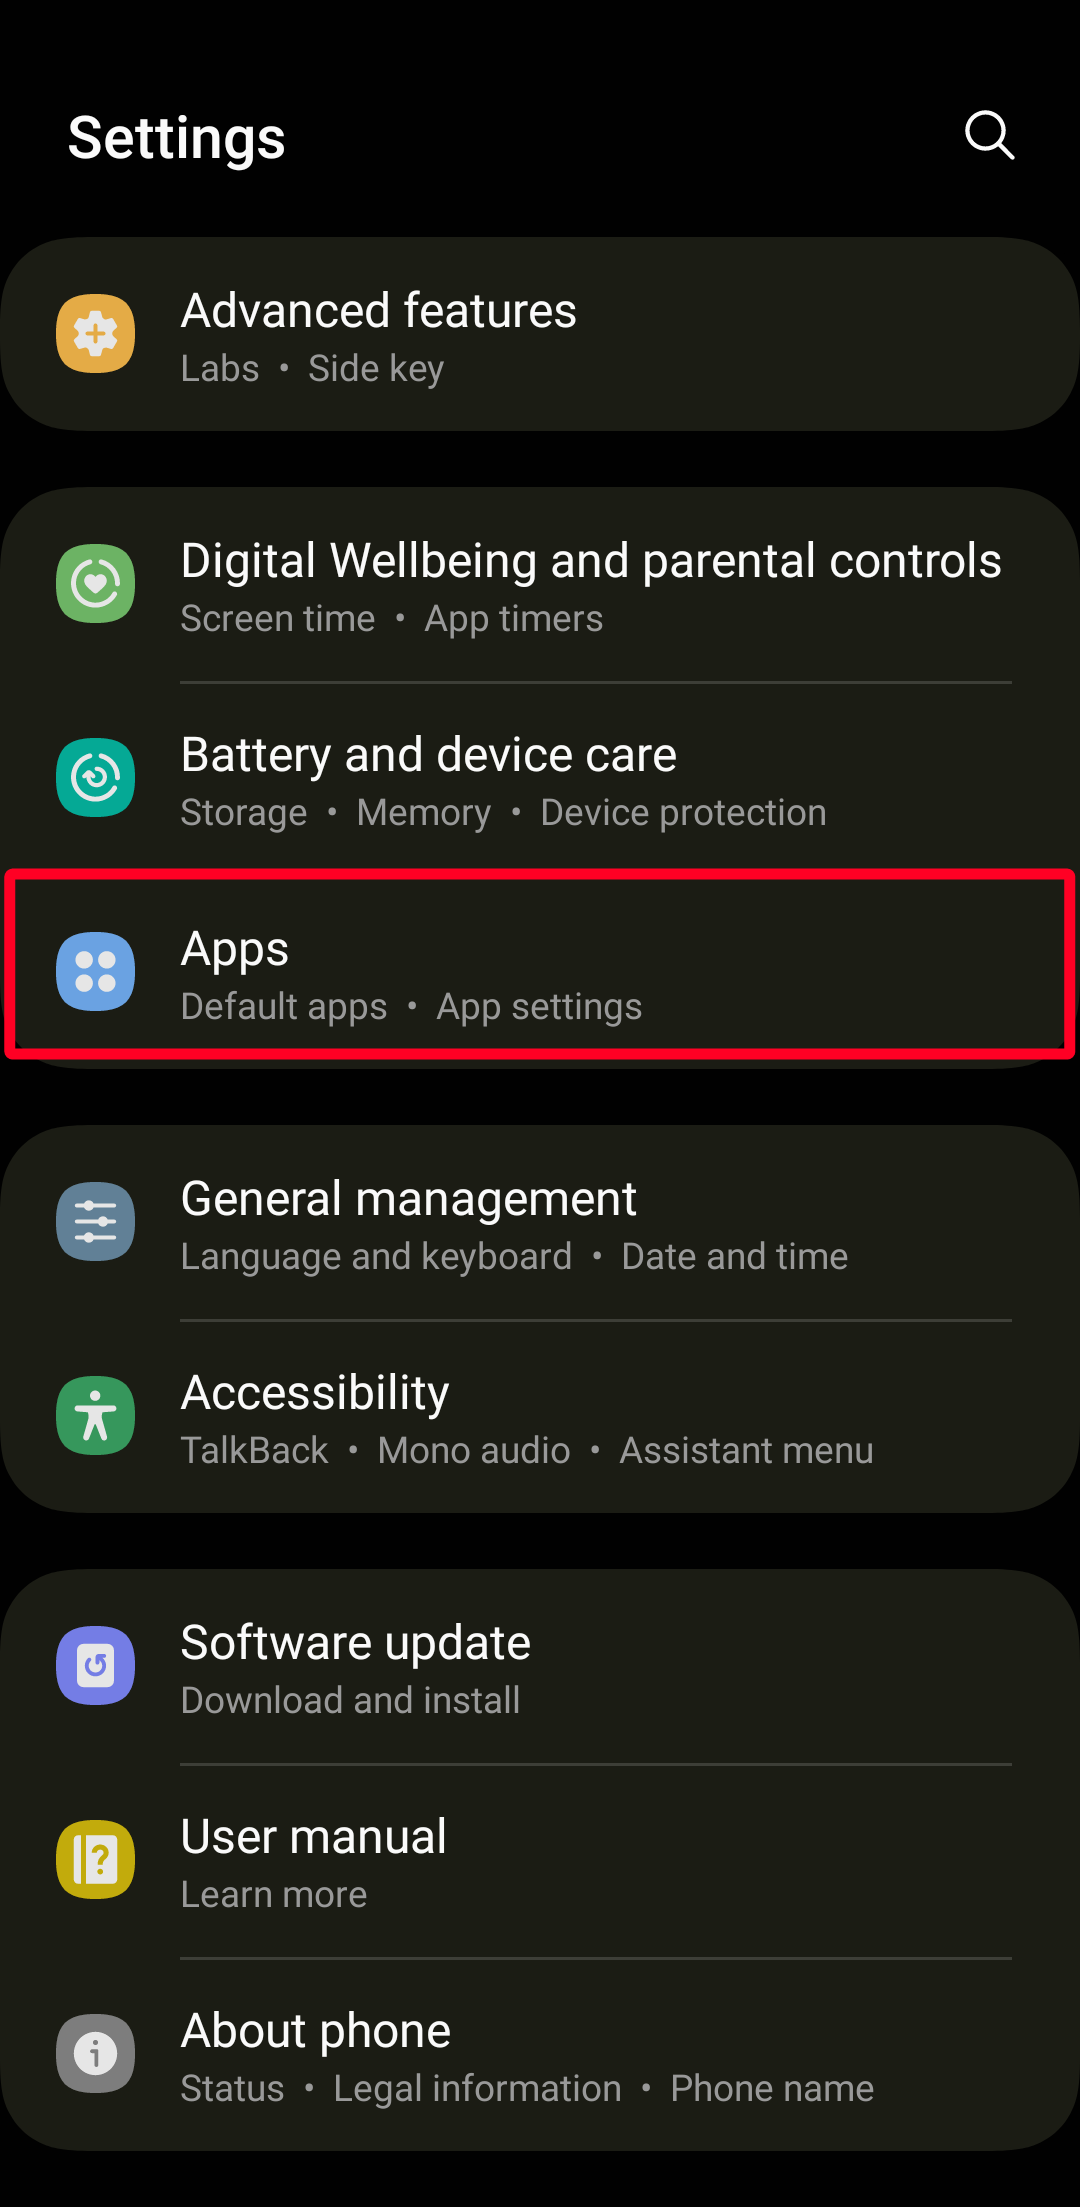 selecting Apps option in Android settings menu